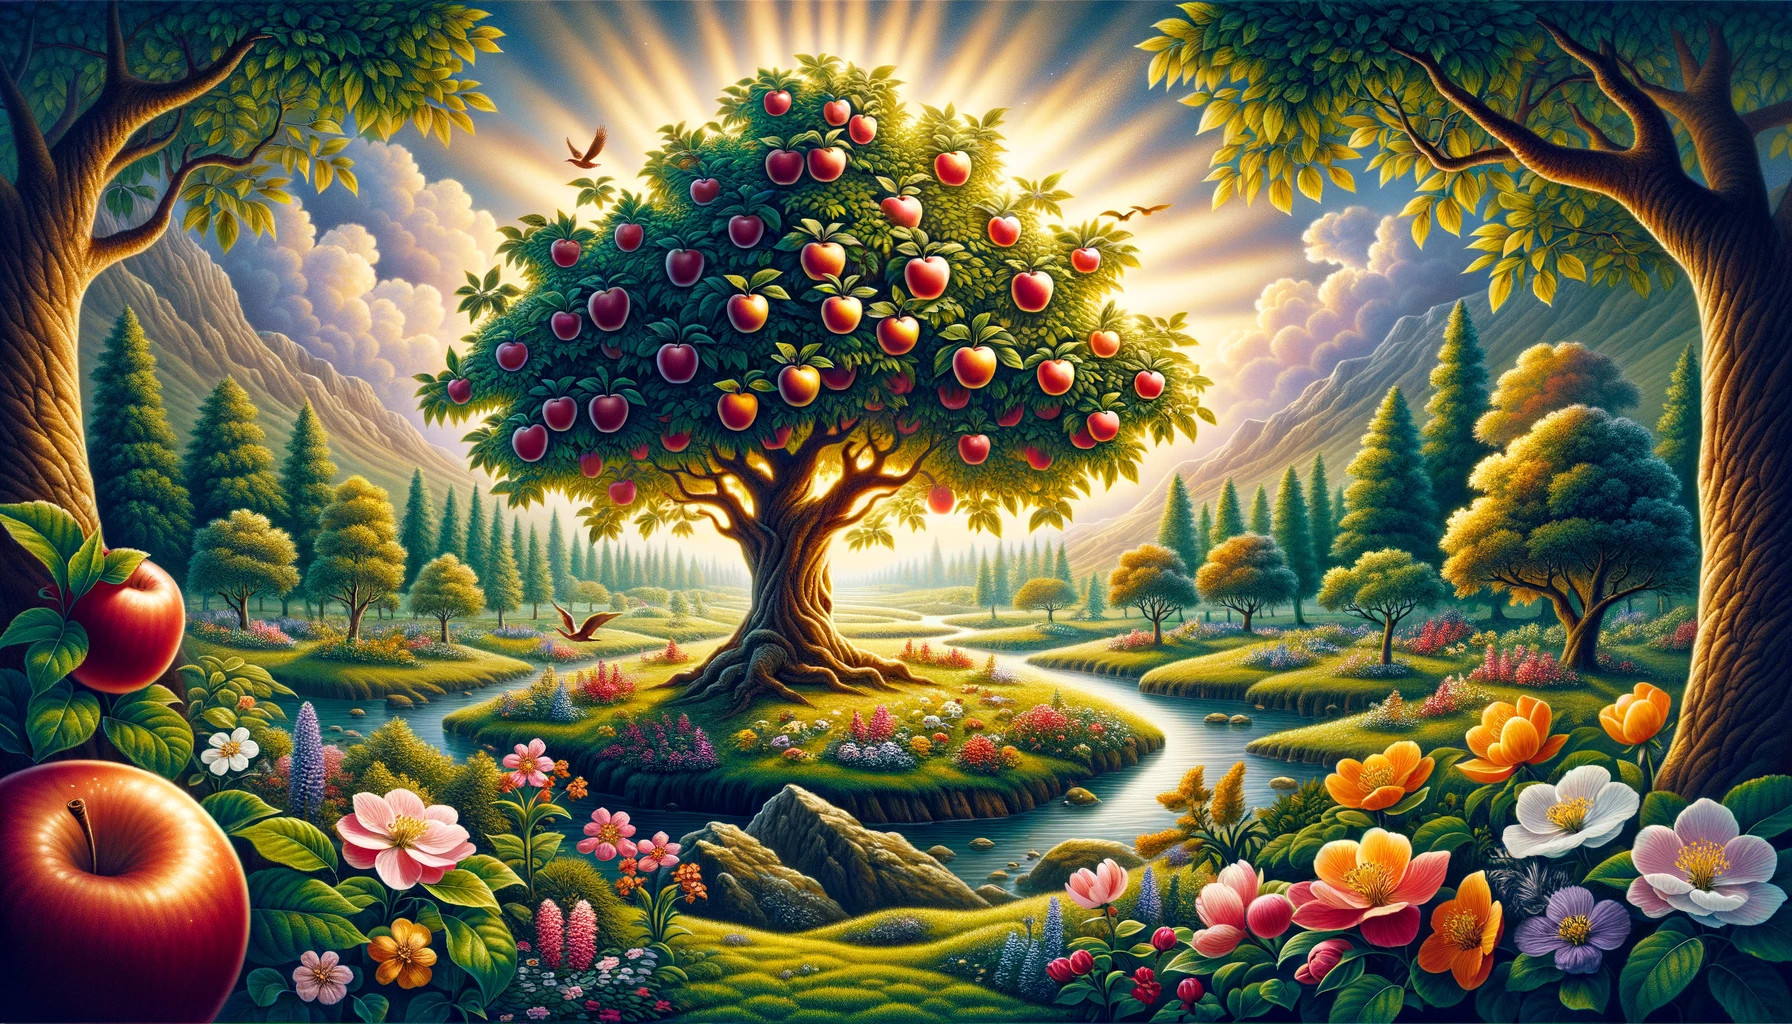 biblical meaning of an apple tree insights